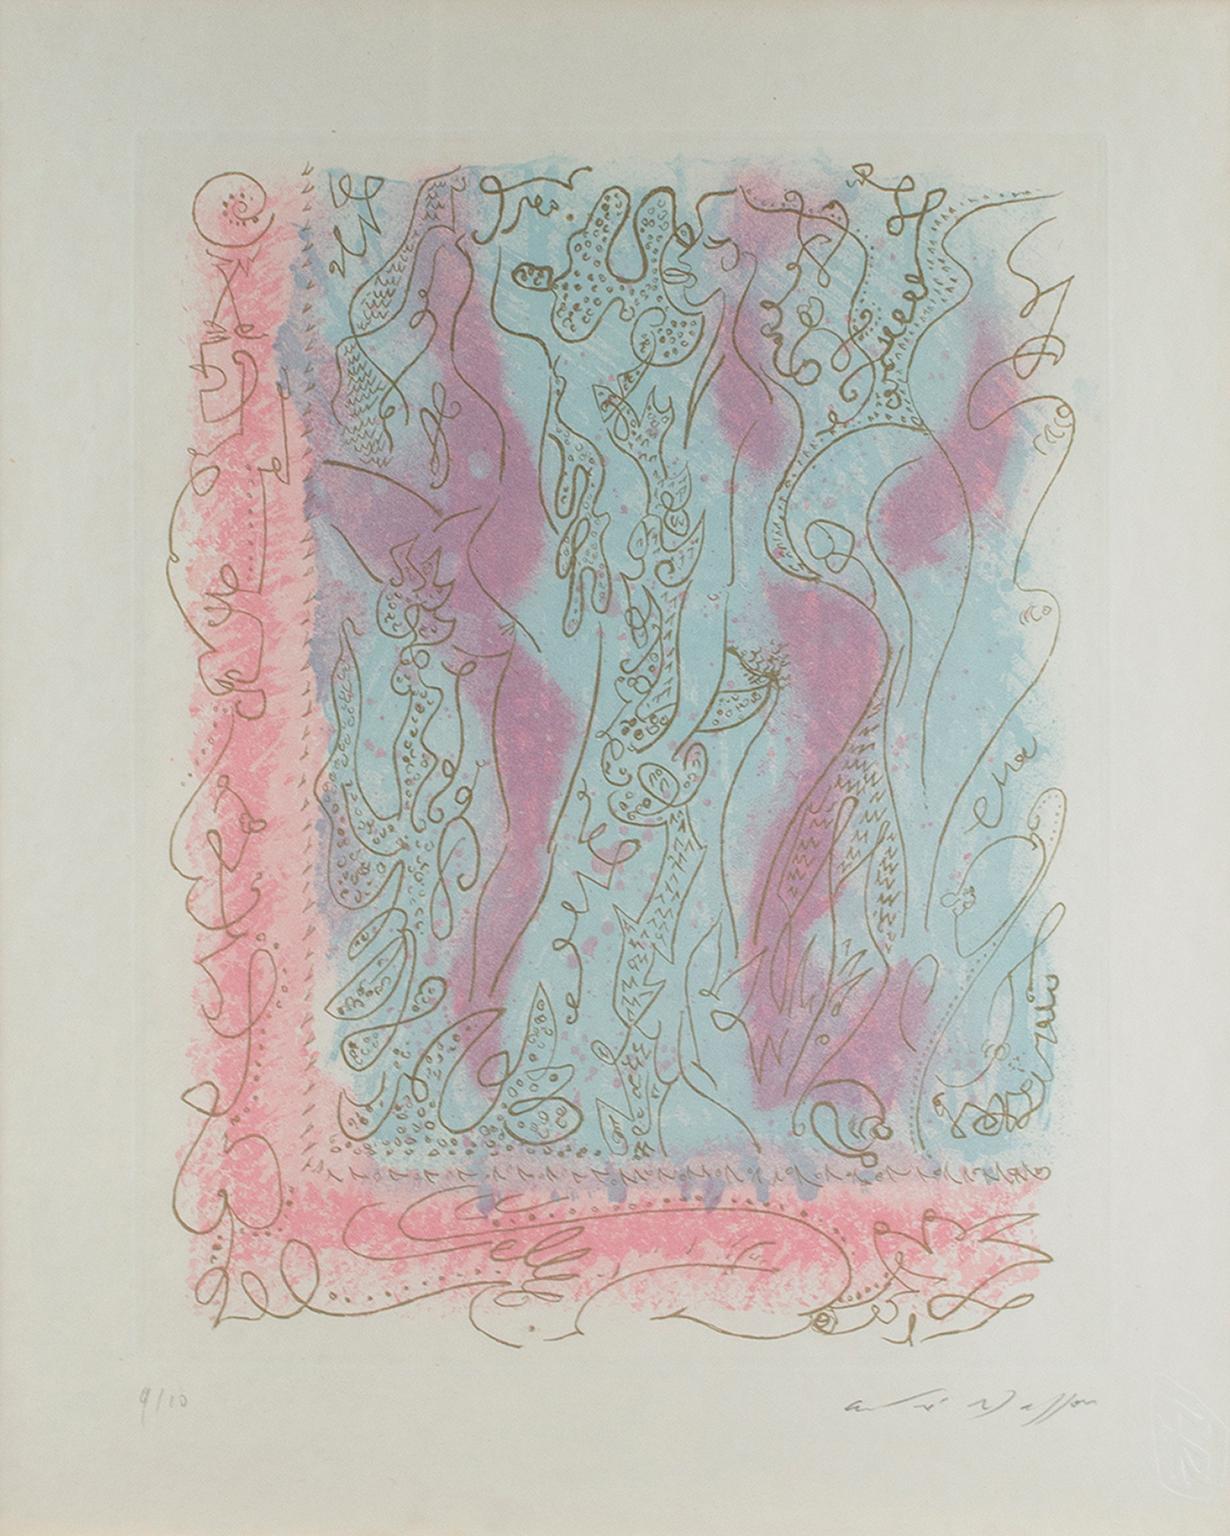 "Les Erophages" Etching & Aquatint with Gold Ink on Paper signed by Andre Masson